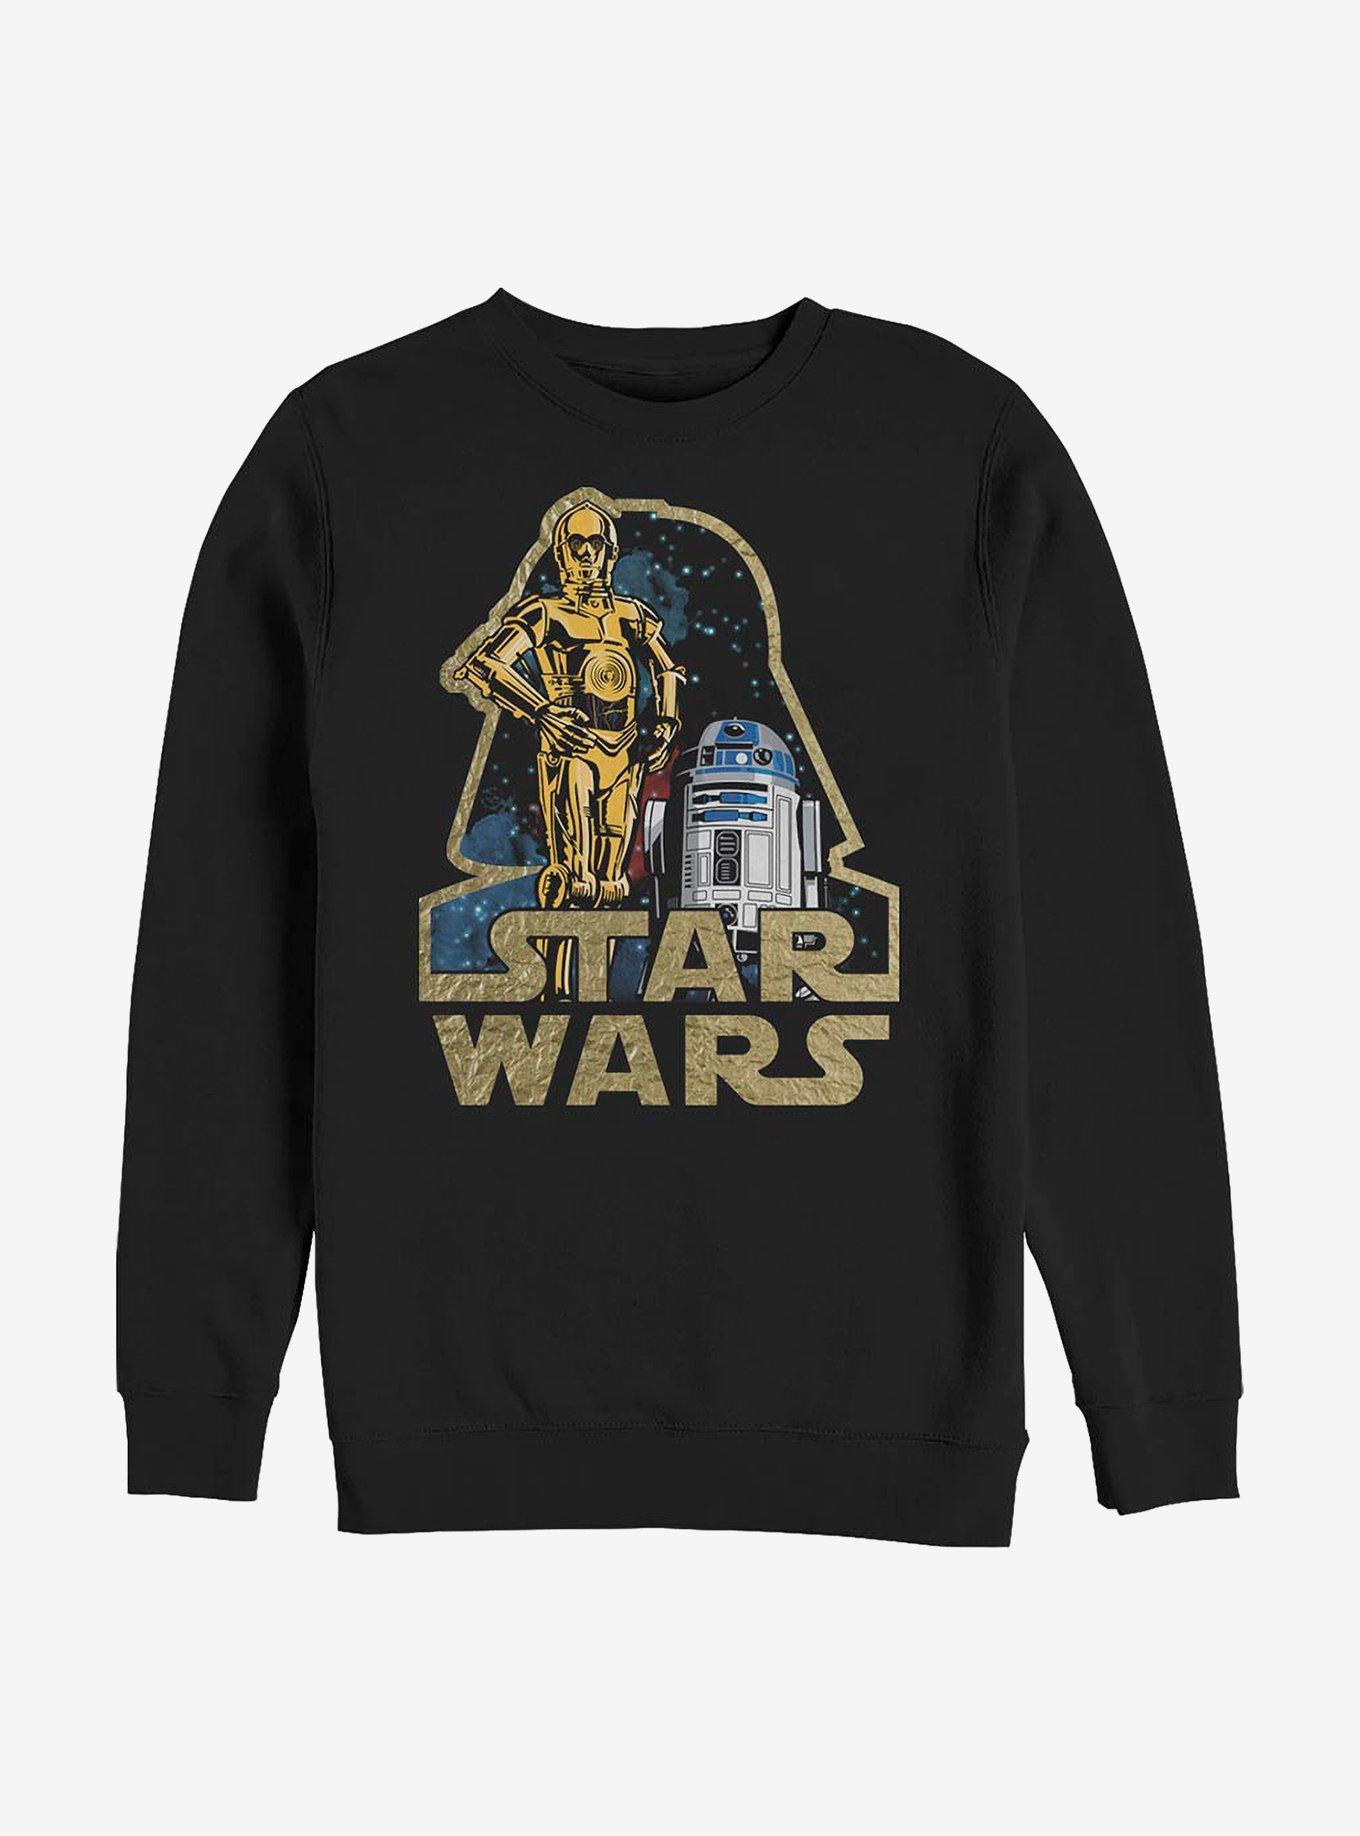 Star Wars These Are The Droids Crew Sweatshirt